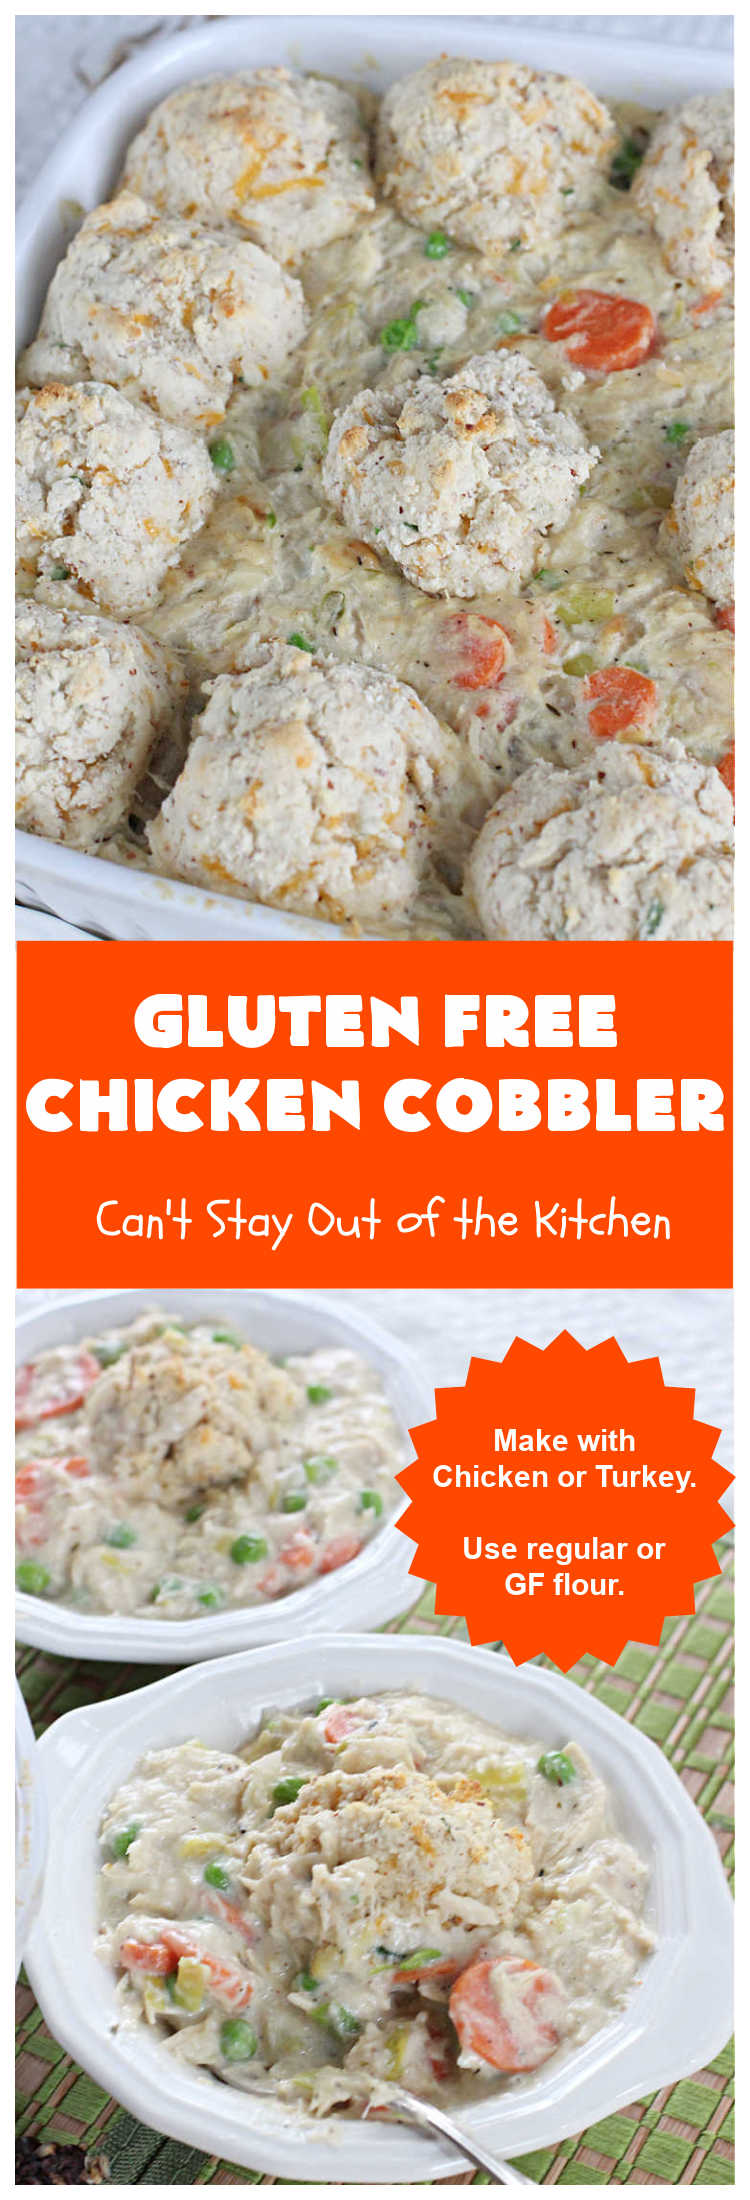 Gluten Free Chicken Cobbler | Can't Stay Out of the Kitchen | this #ChickenCobbler can't be beat! It's fantastic with #chicken or #turkey & can be made #GlutenFree or NOT - as you prefer. Terrific way to use up leftover rotisserie chicken or #Thanksgiving turkey. Our family loves this #recipe. #GlutenFreeChickenCobbler #ChickenPotPie #ChickenAndDumplings